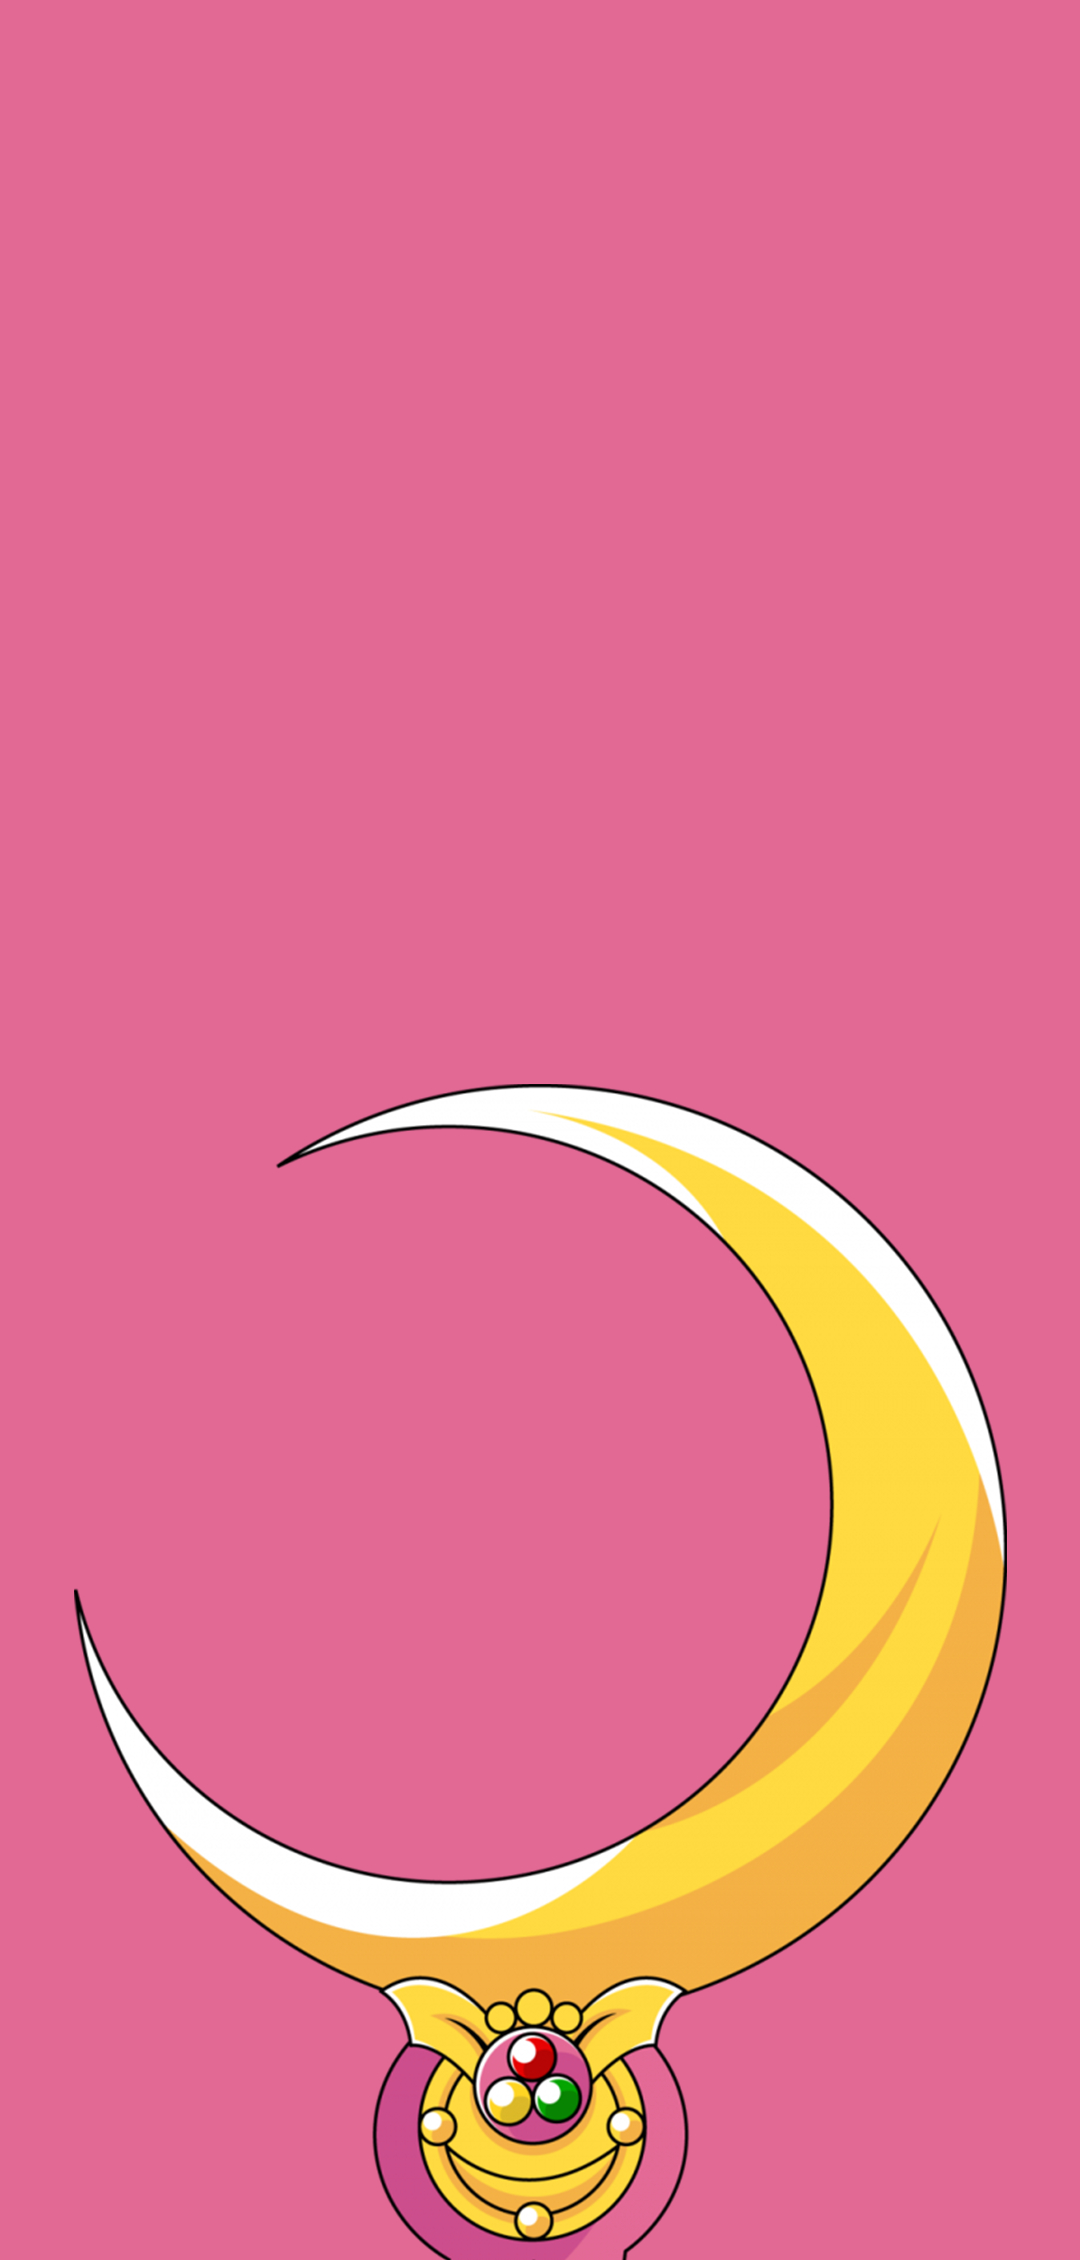 Pink Portrait Display Moon Crescent Moon Minimalism Simple Background Pink Background Anime 1080x2260